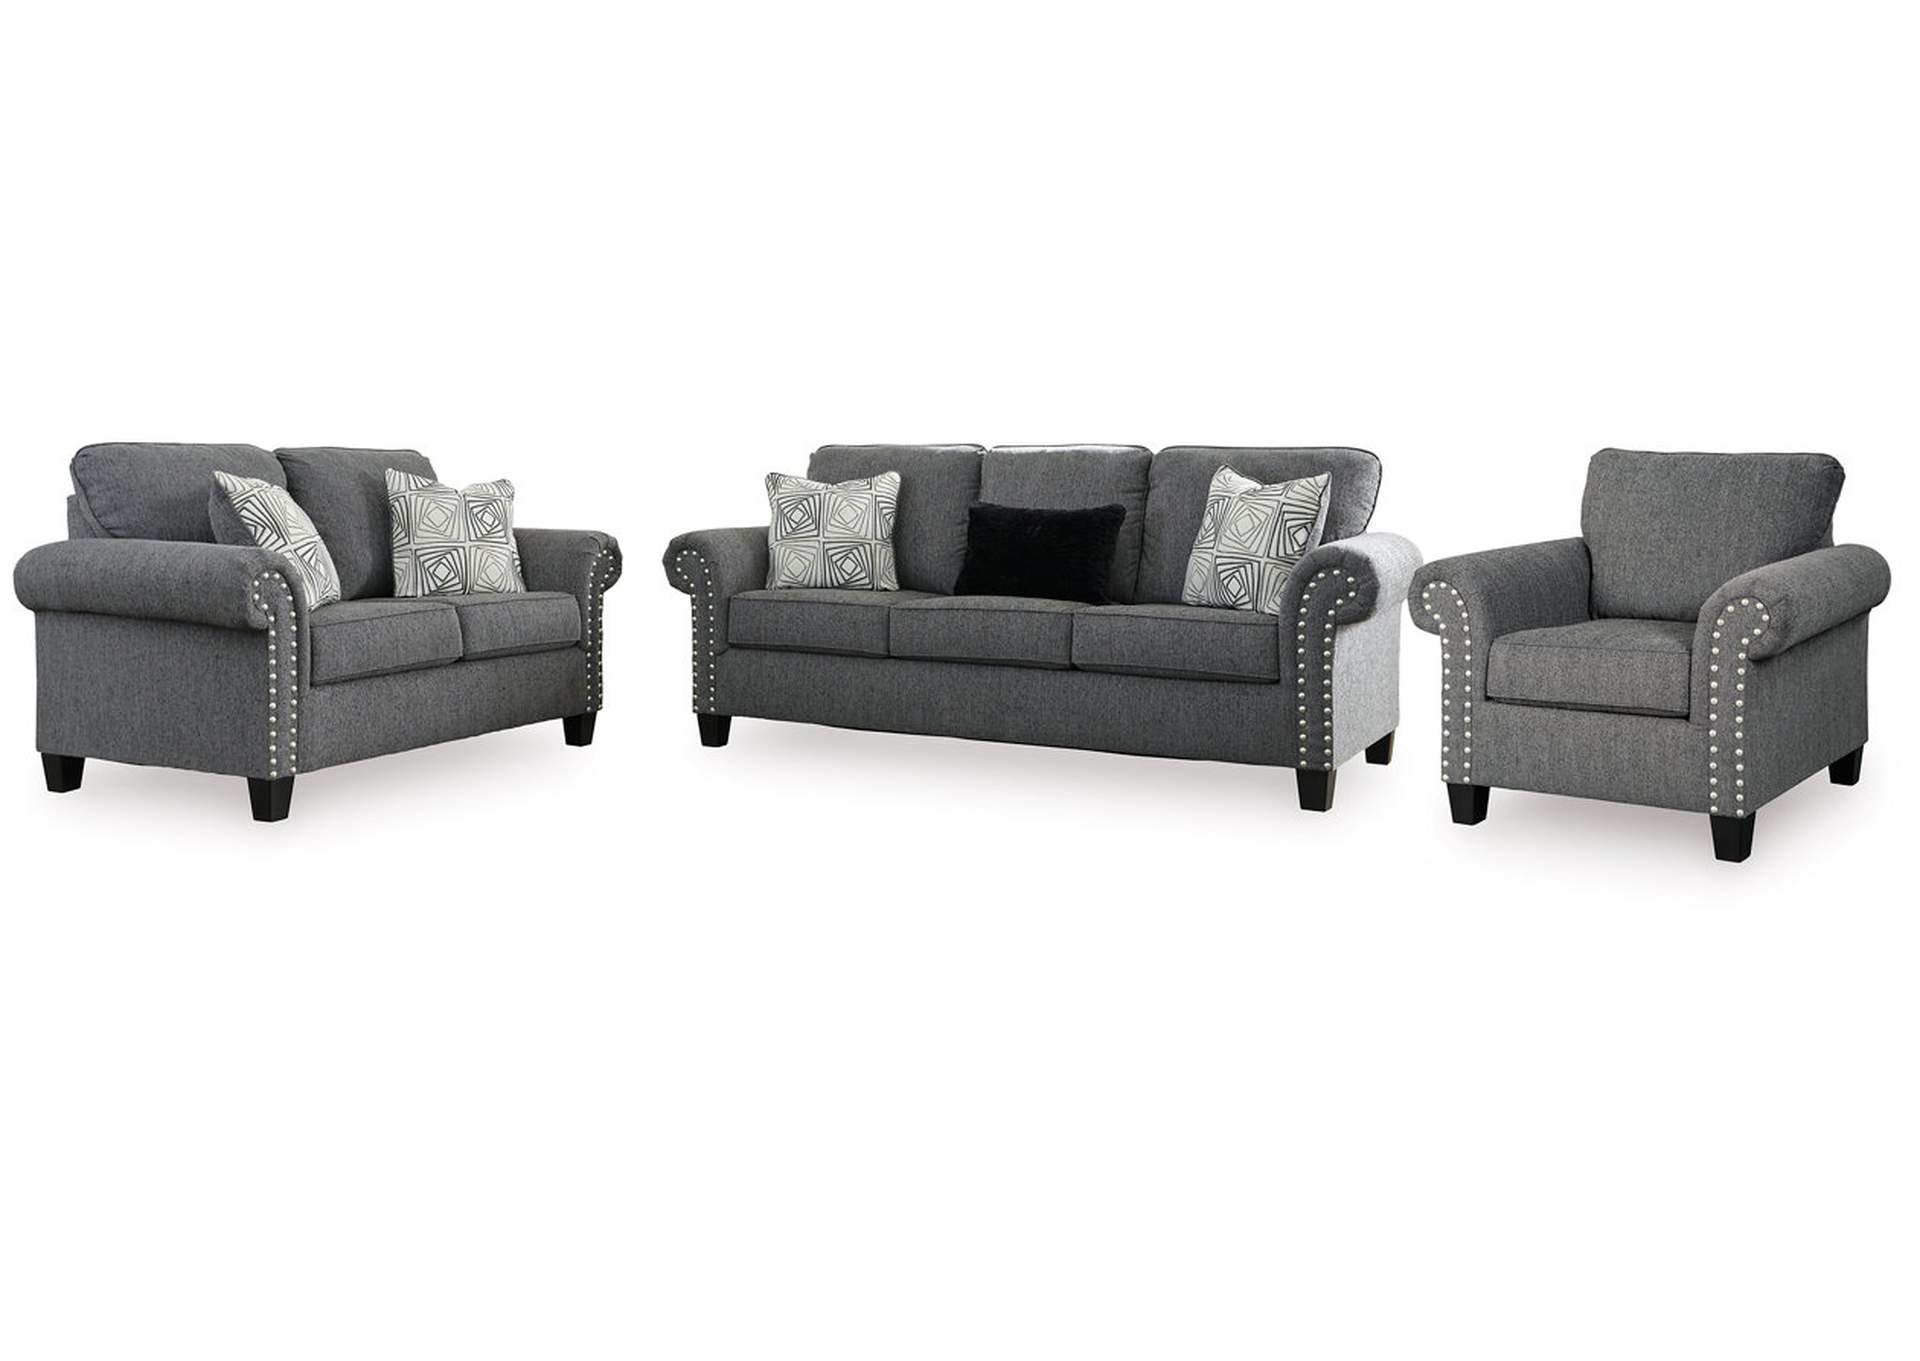 Agleno Sofa, Loveseat and Chair,Benchcraft